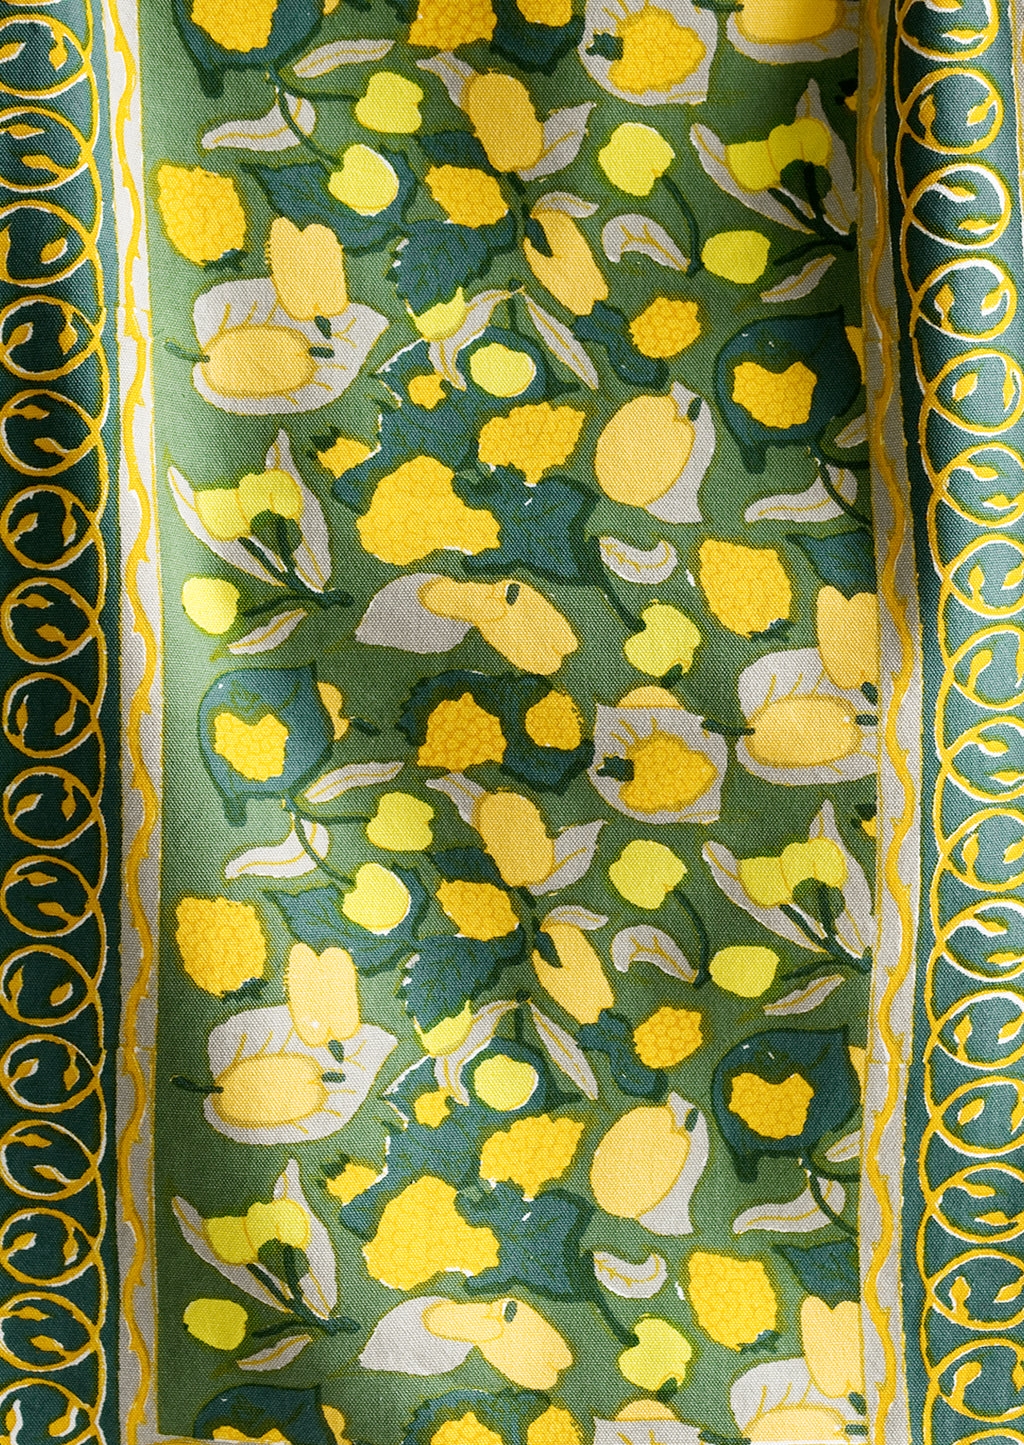 2: A block printed table runner in green and yellow print.